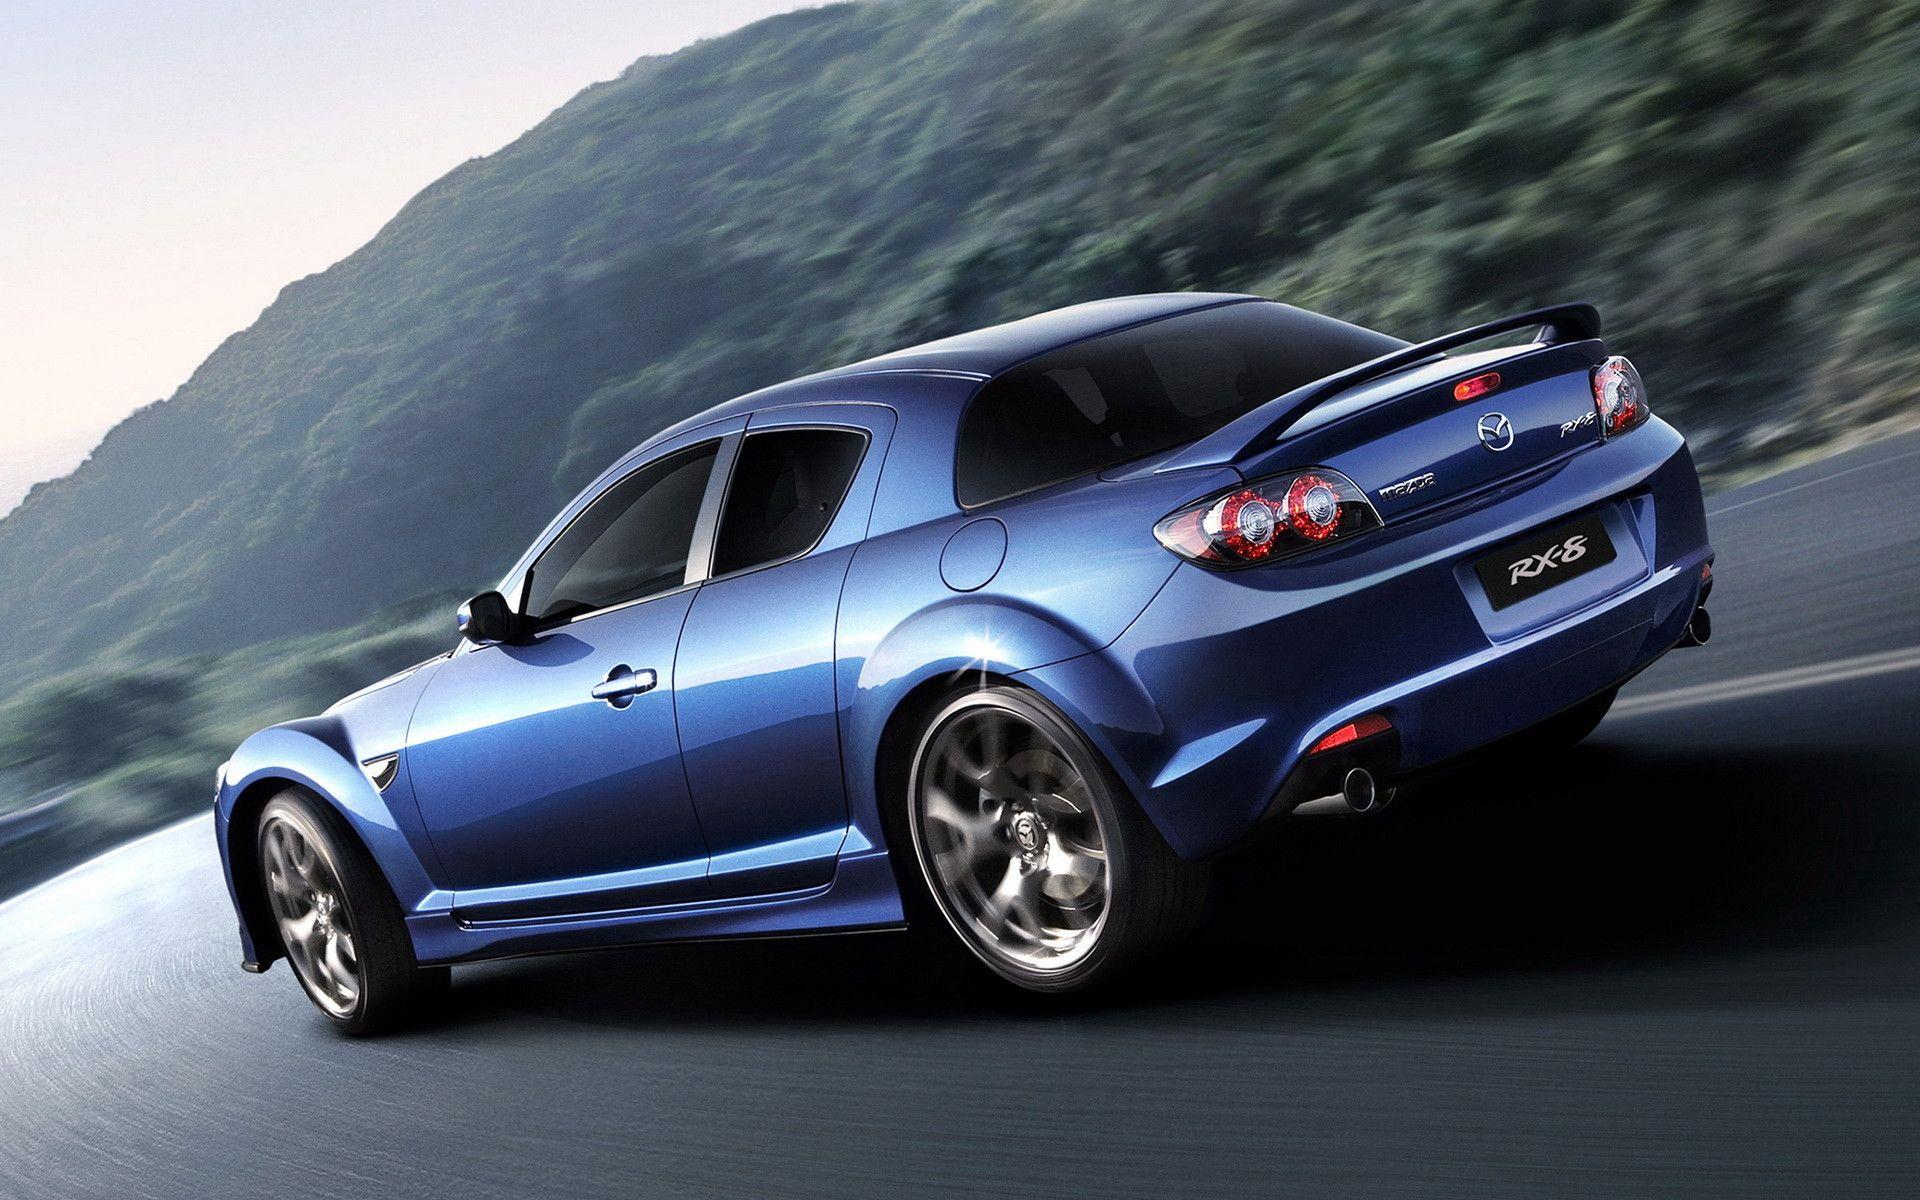 Mazda RX 8 Wallpaper And Image, Picture, Photo